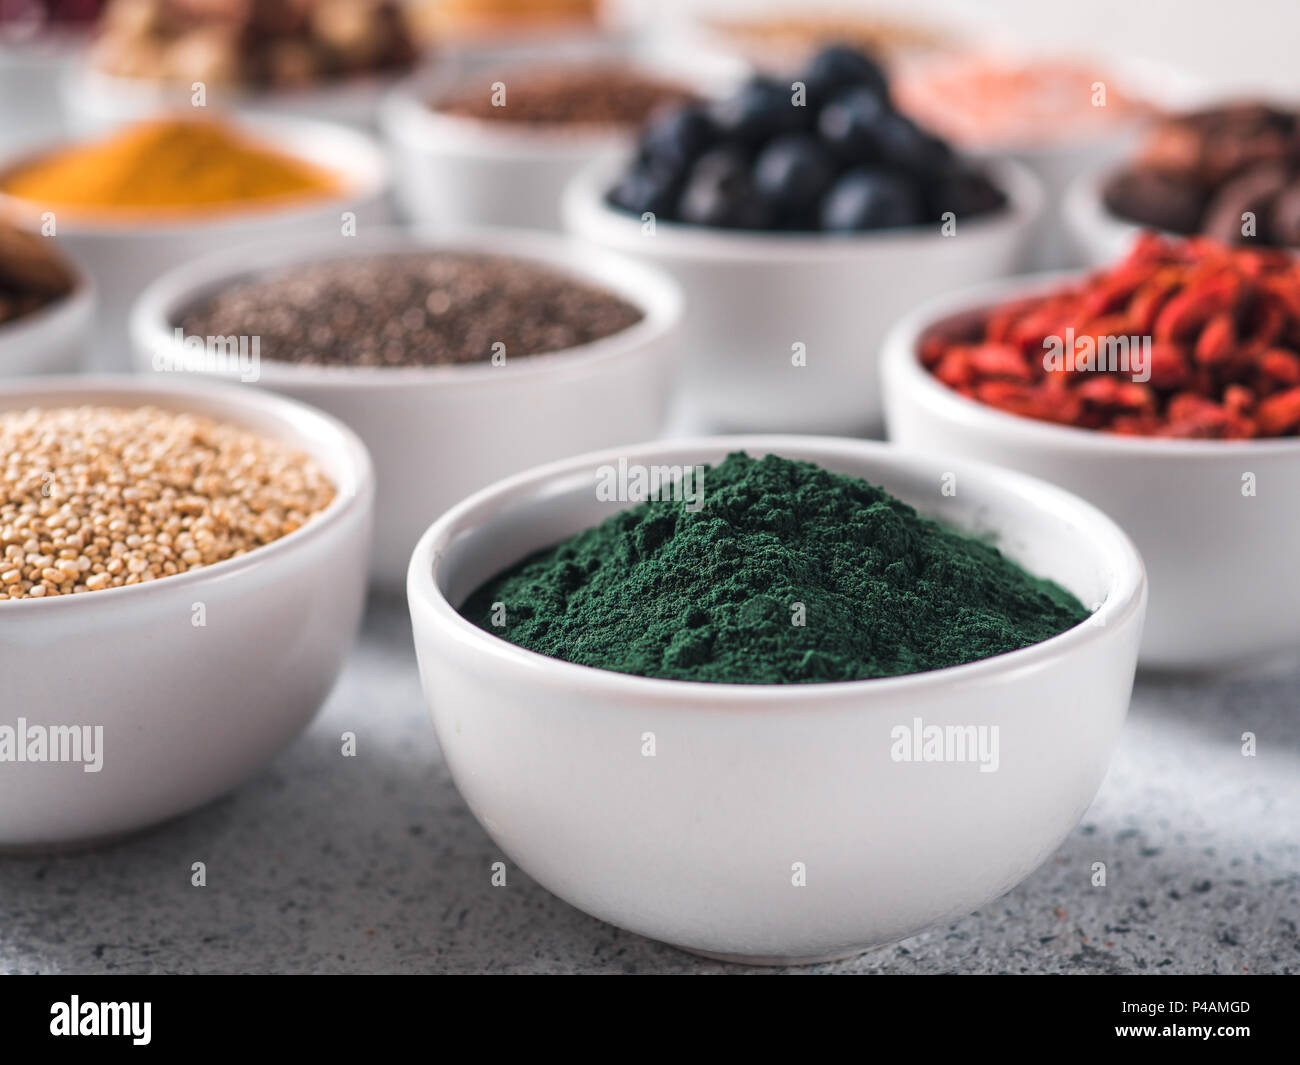 Spirulina powder in small white bowl and other superfoods on background.  Selective focus. Different superfoods ingredients. Concept and illustration  for superfood and detox food Stock Photo - Alamy